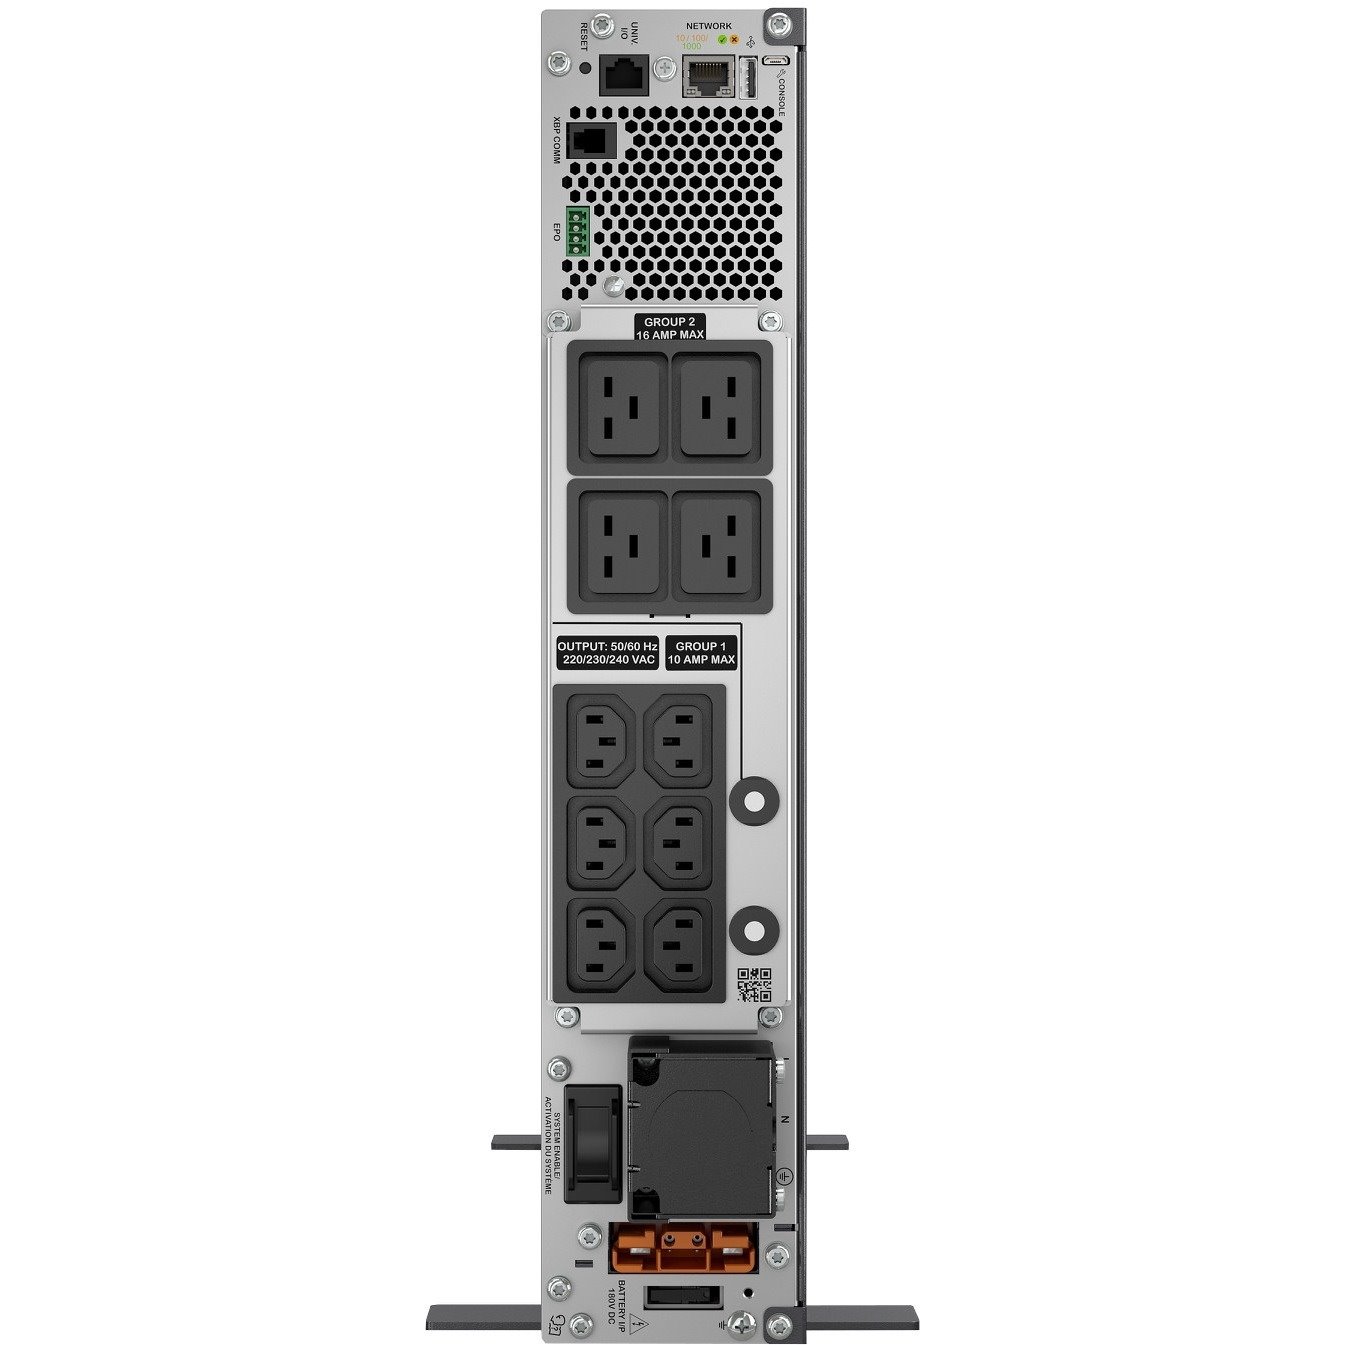 APC by Schneider Electric Smart-UPS Ultra Double Conversion Online UPS - 5 kVA/5 kW